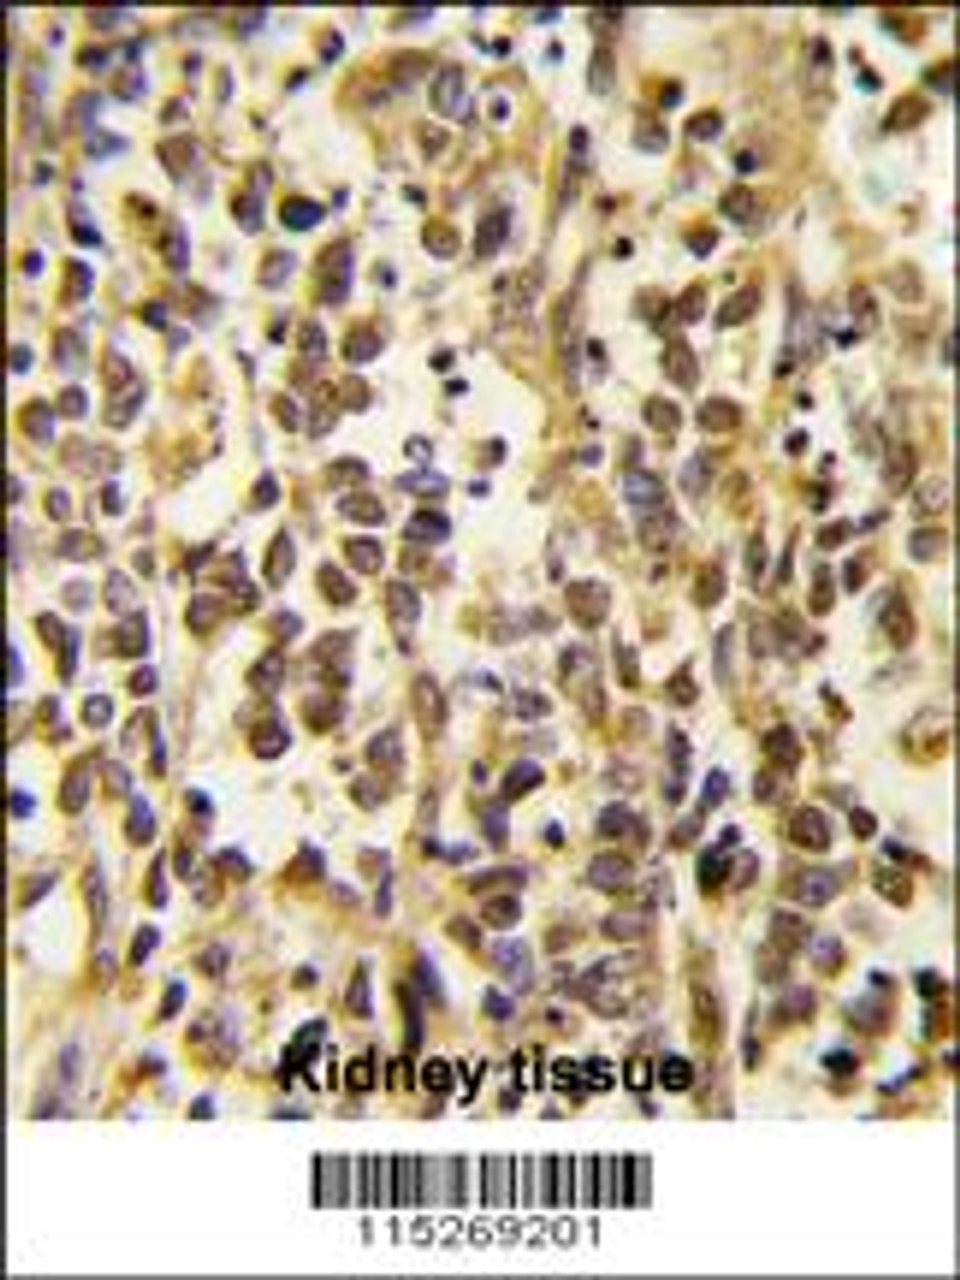 Formalin-fixed and paraffin-embedded human kidney tissue reacted with the primary antibody, which was peroxidase-conjugated to the secondary antibody, followed by DAB staining.